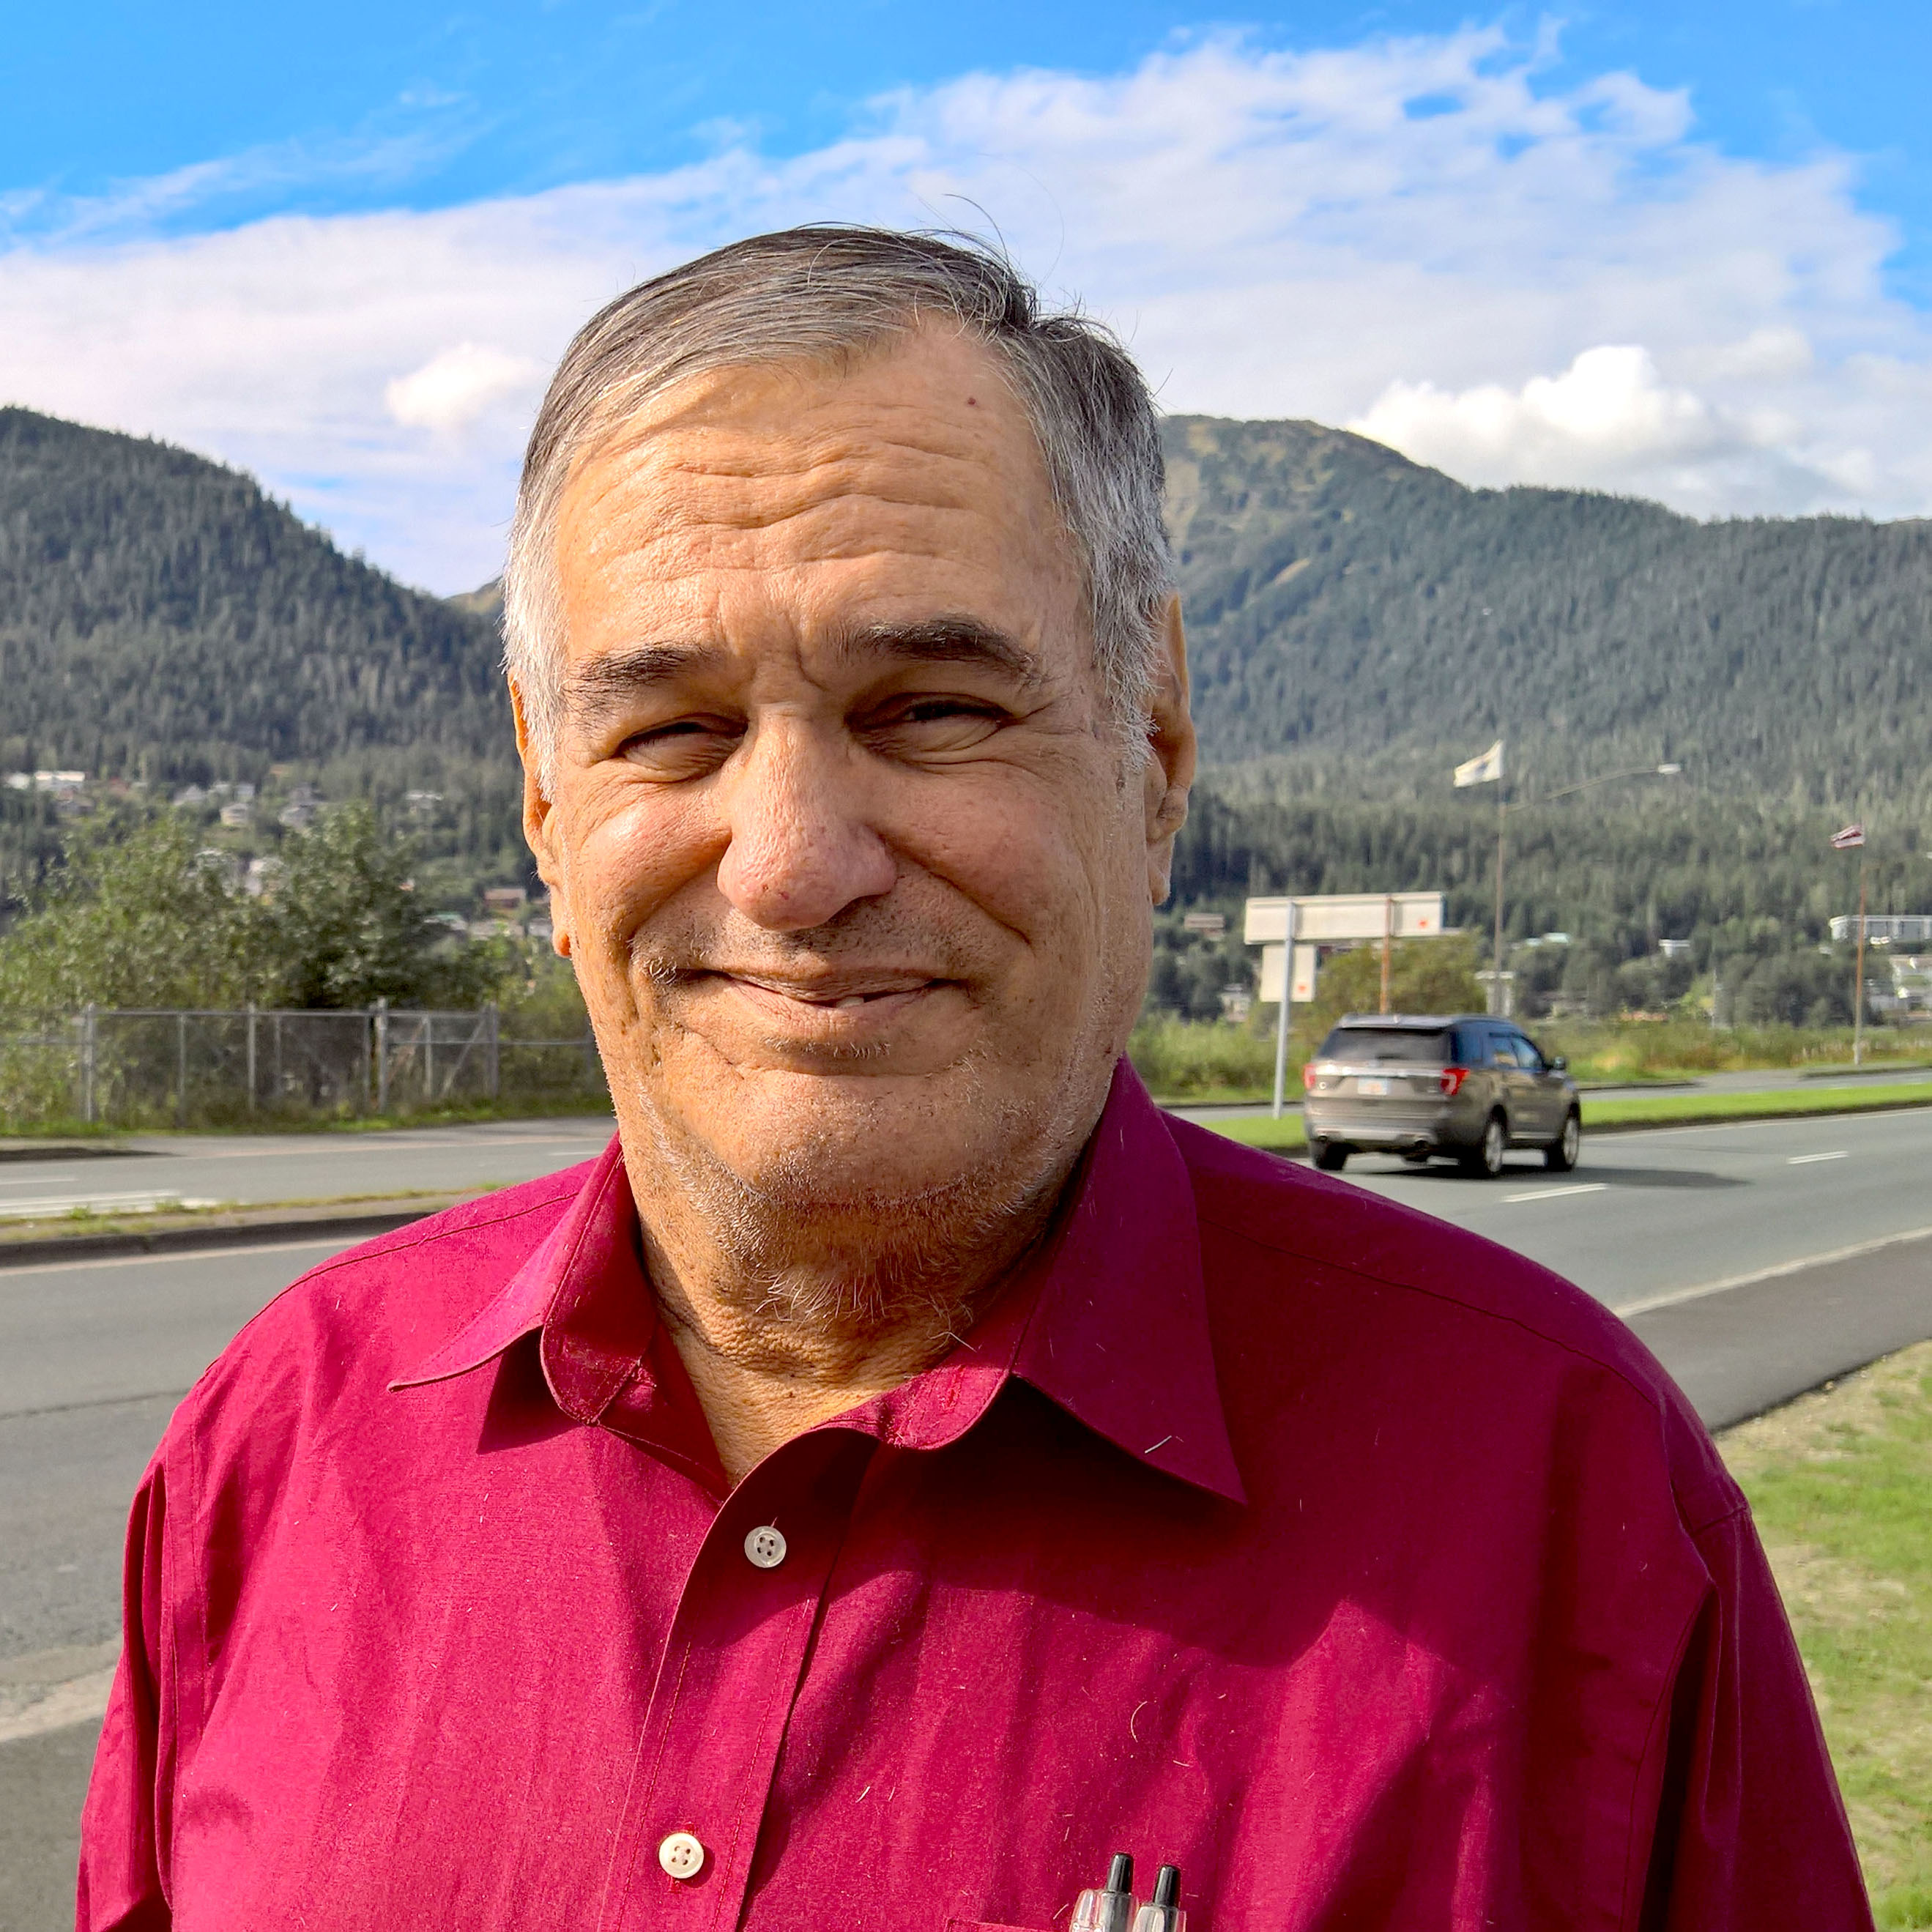 William Quayle poses for a photo outside KTOO, Sept. 2, 2016. Quayle is a candidate for Juneau Assembly. (Photo by Jeremy Hsieh/KTOO)